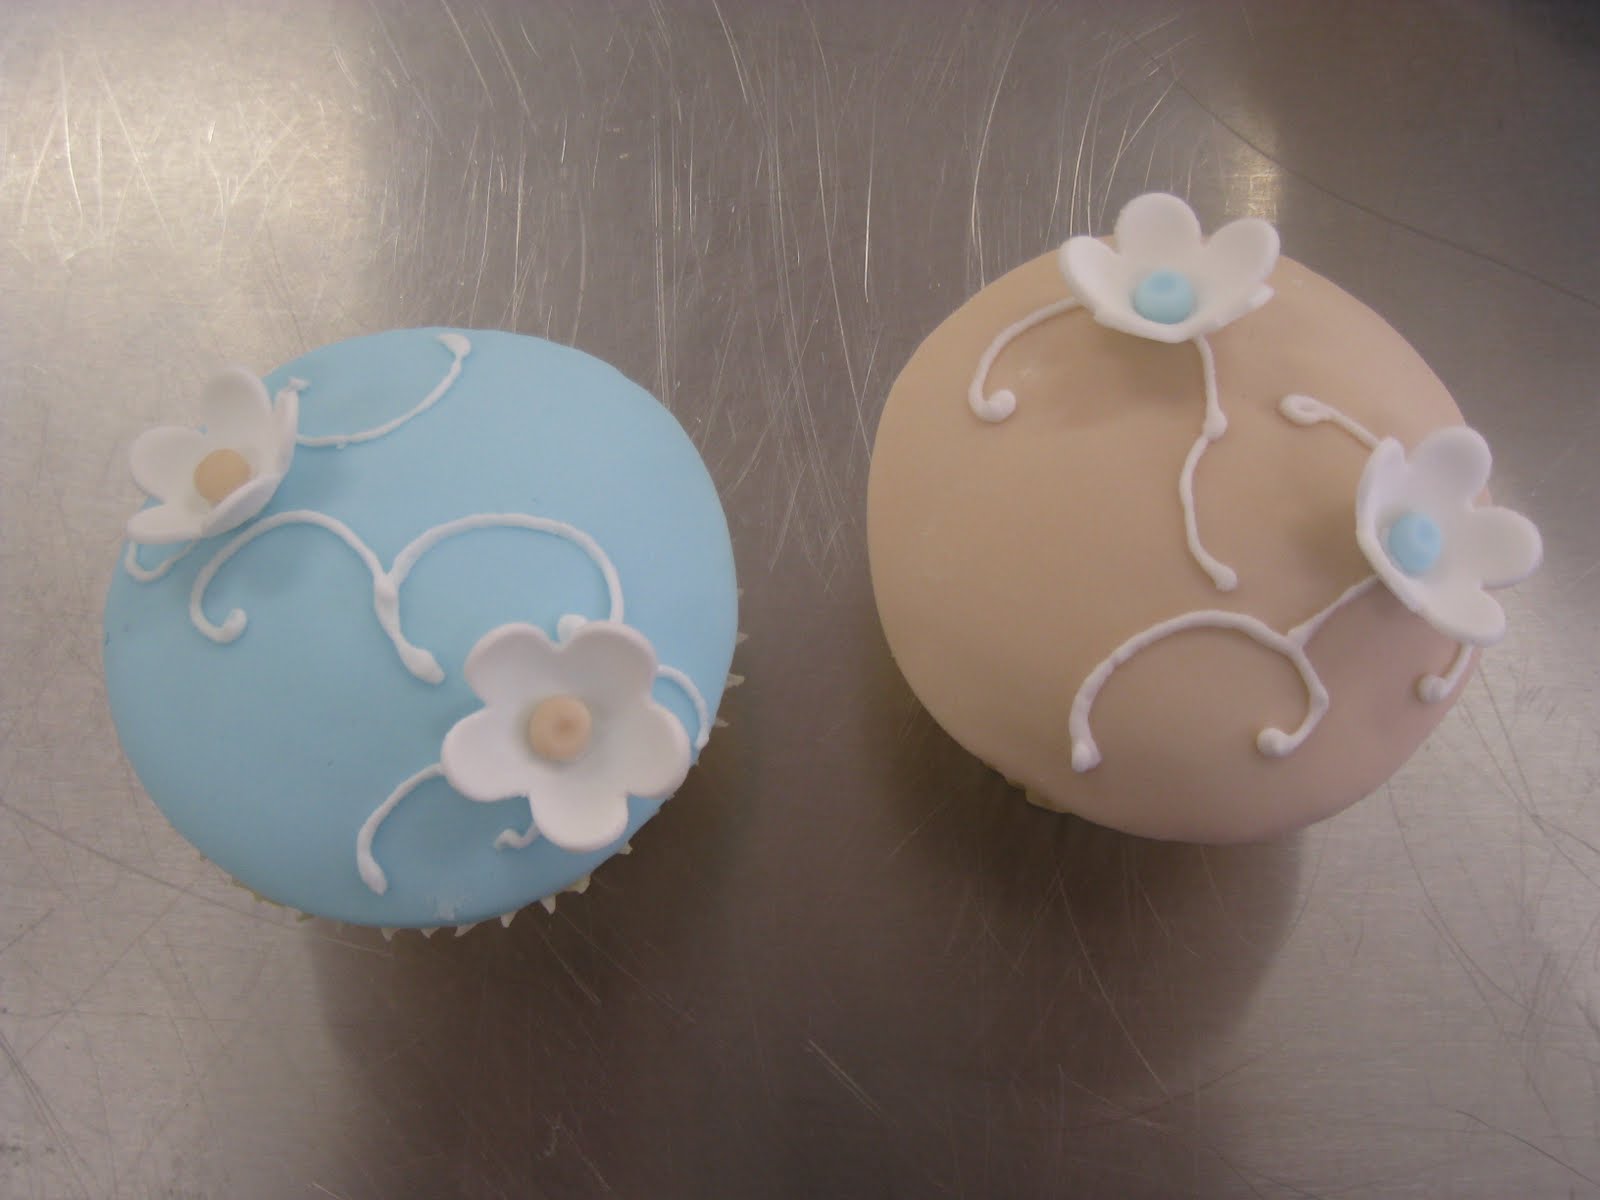 The cupcake stand itself was also iced in matching colours to compliment the